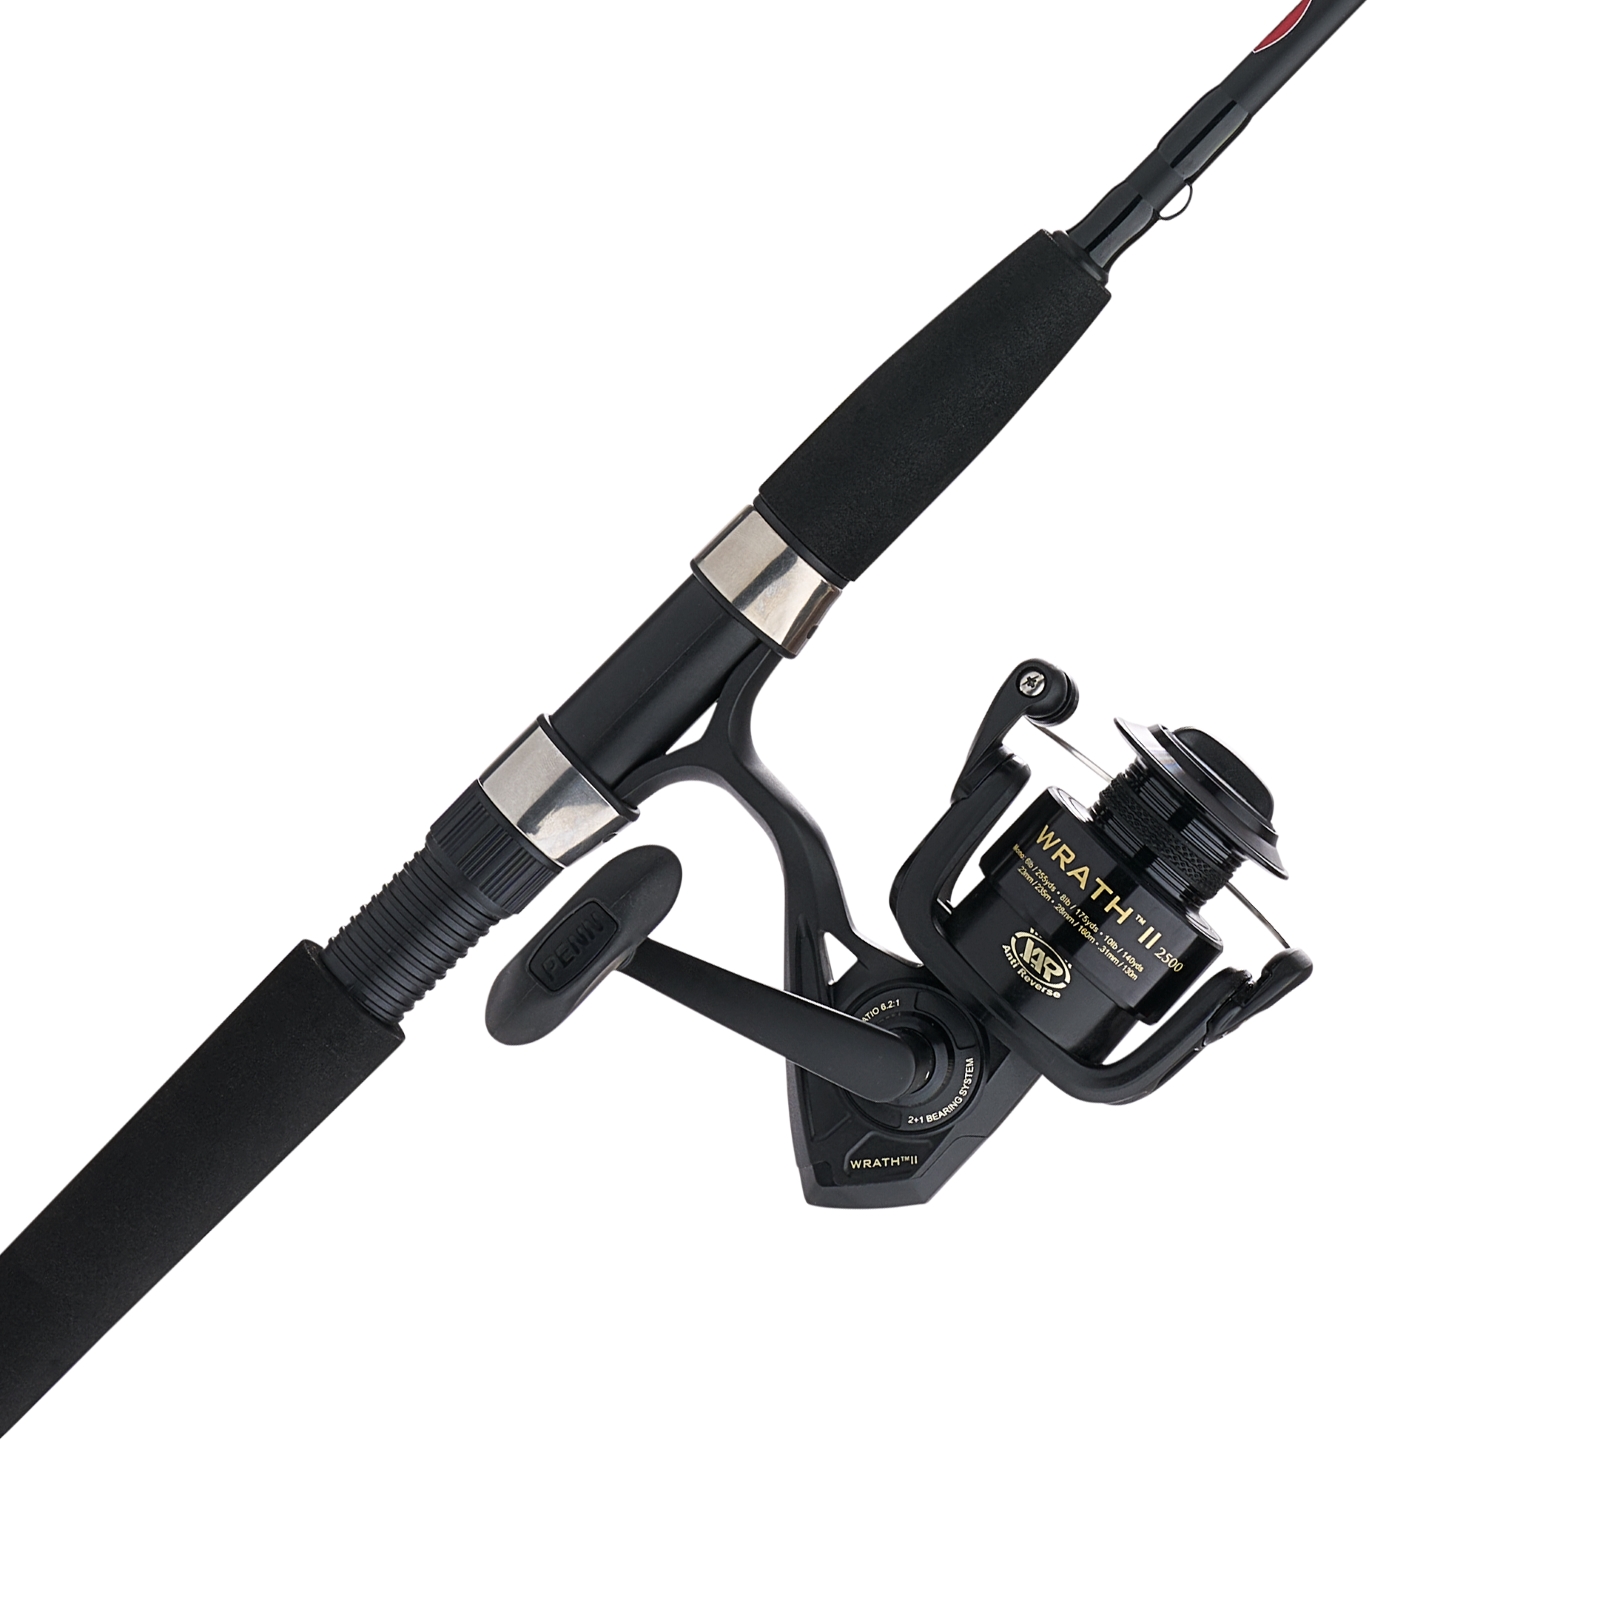 NEW PENN Wrath II Reel and Combo - Affordable Option